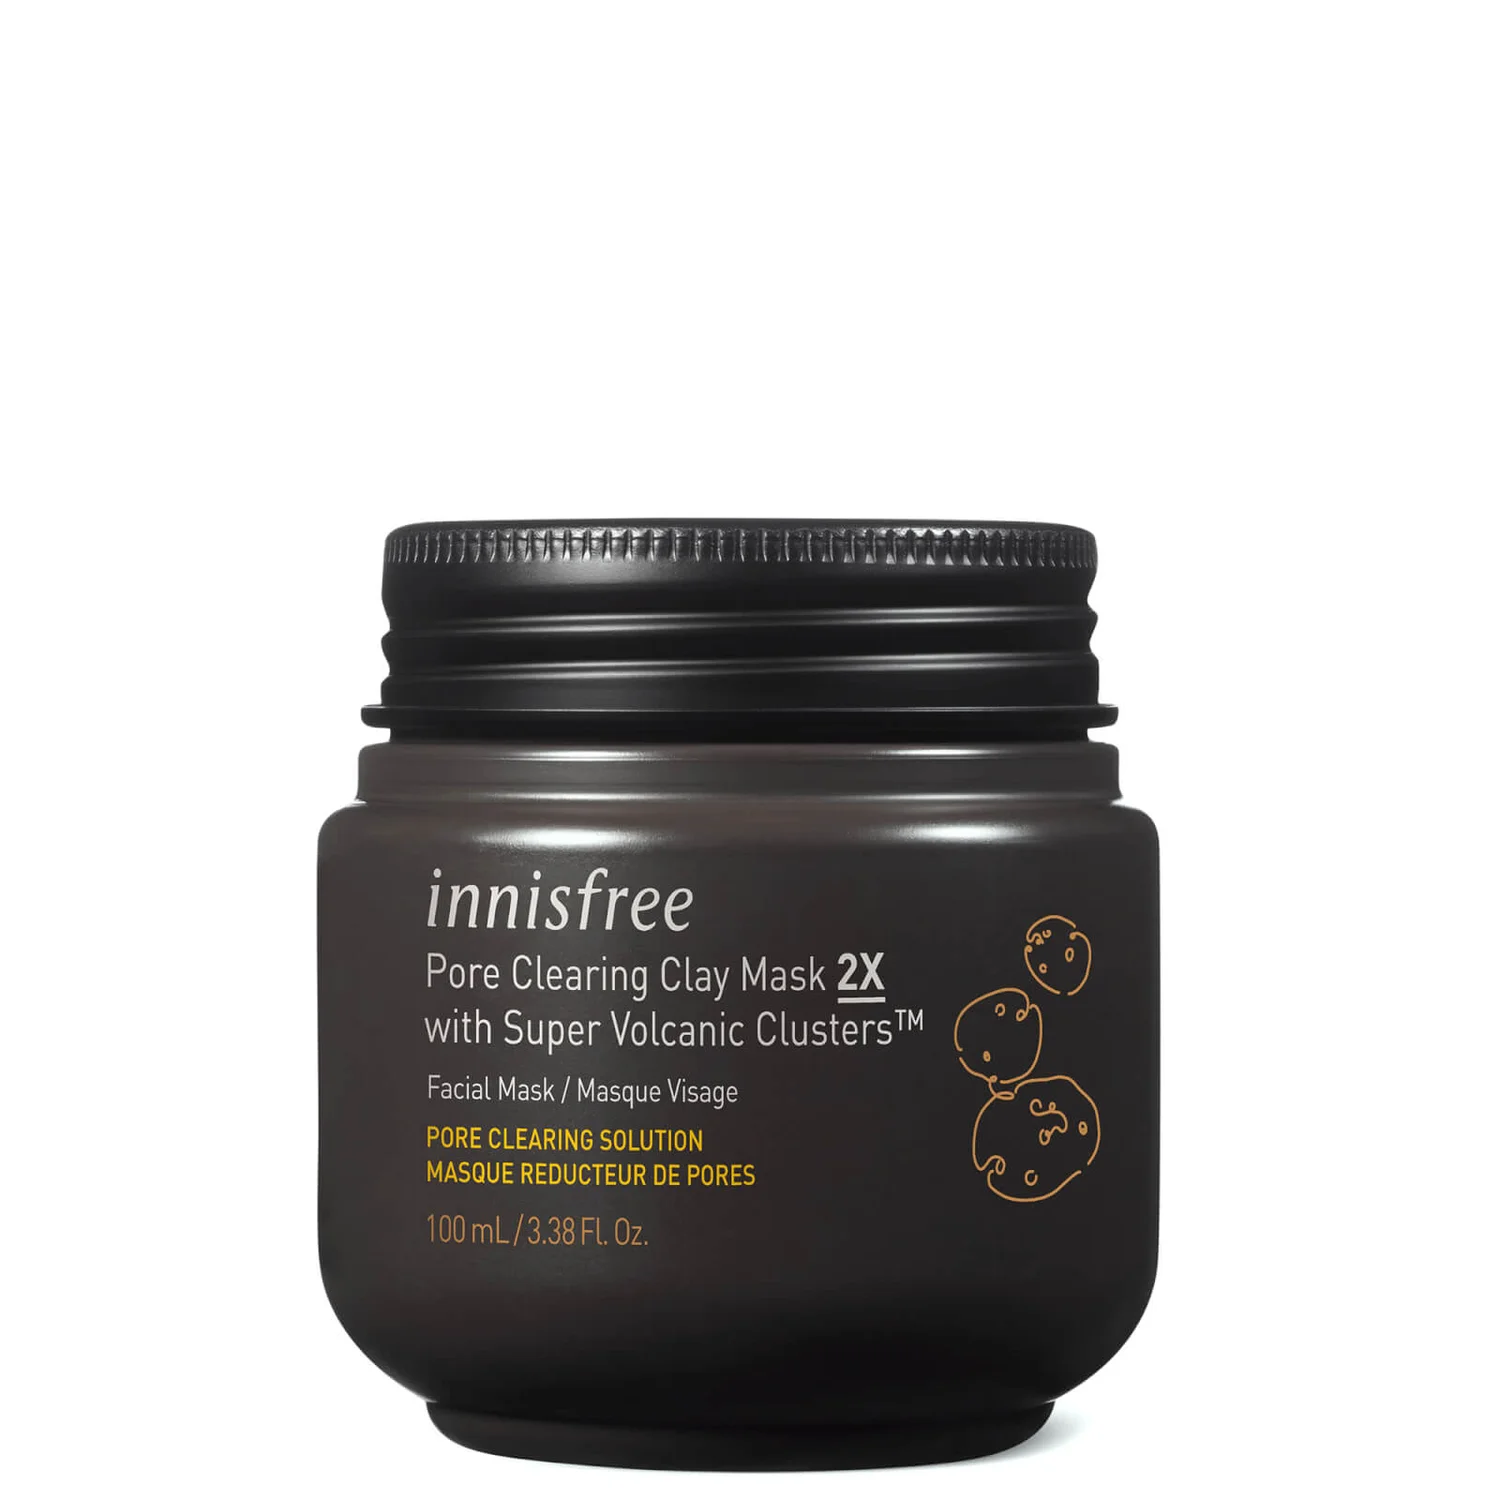 cultbeauty.co.uk | innisfree Pore Clearing Clay Mask